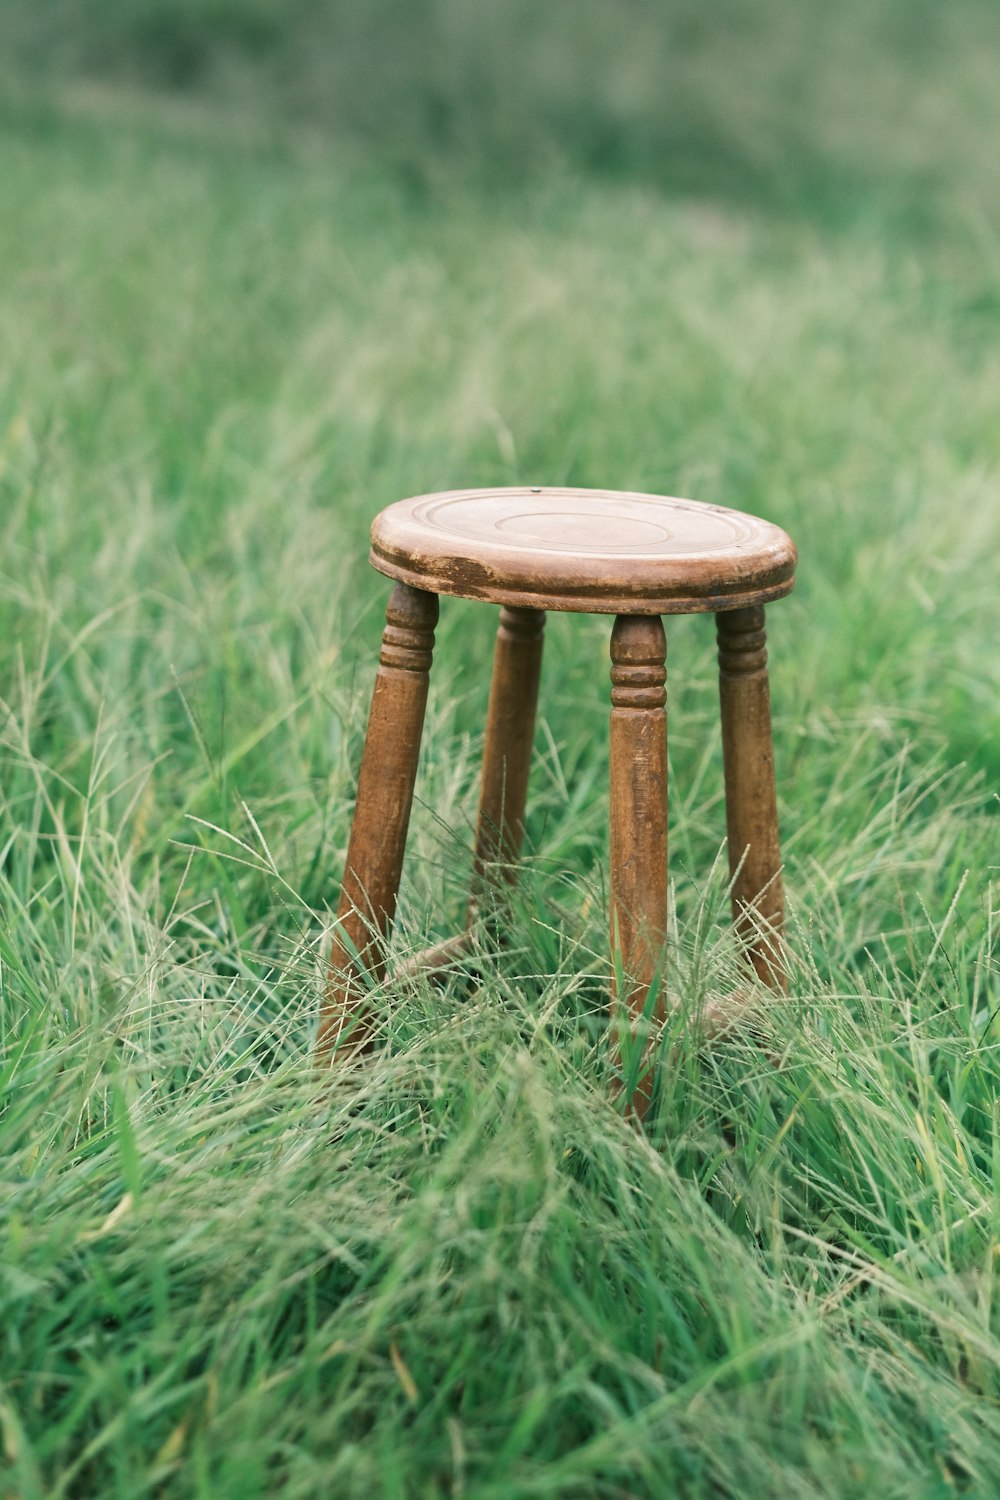 a small wooden stool in a grassy field